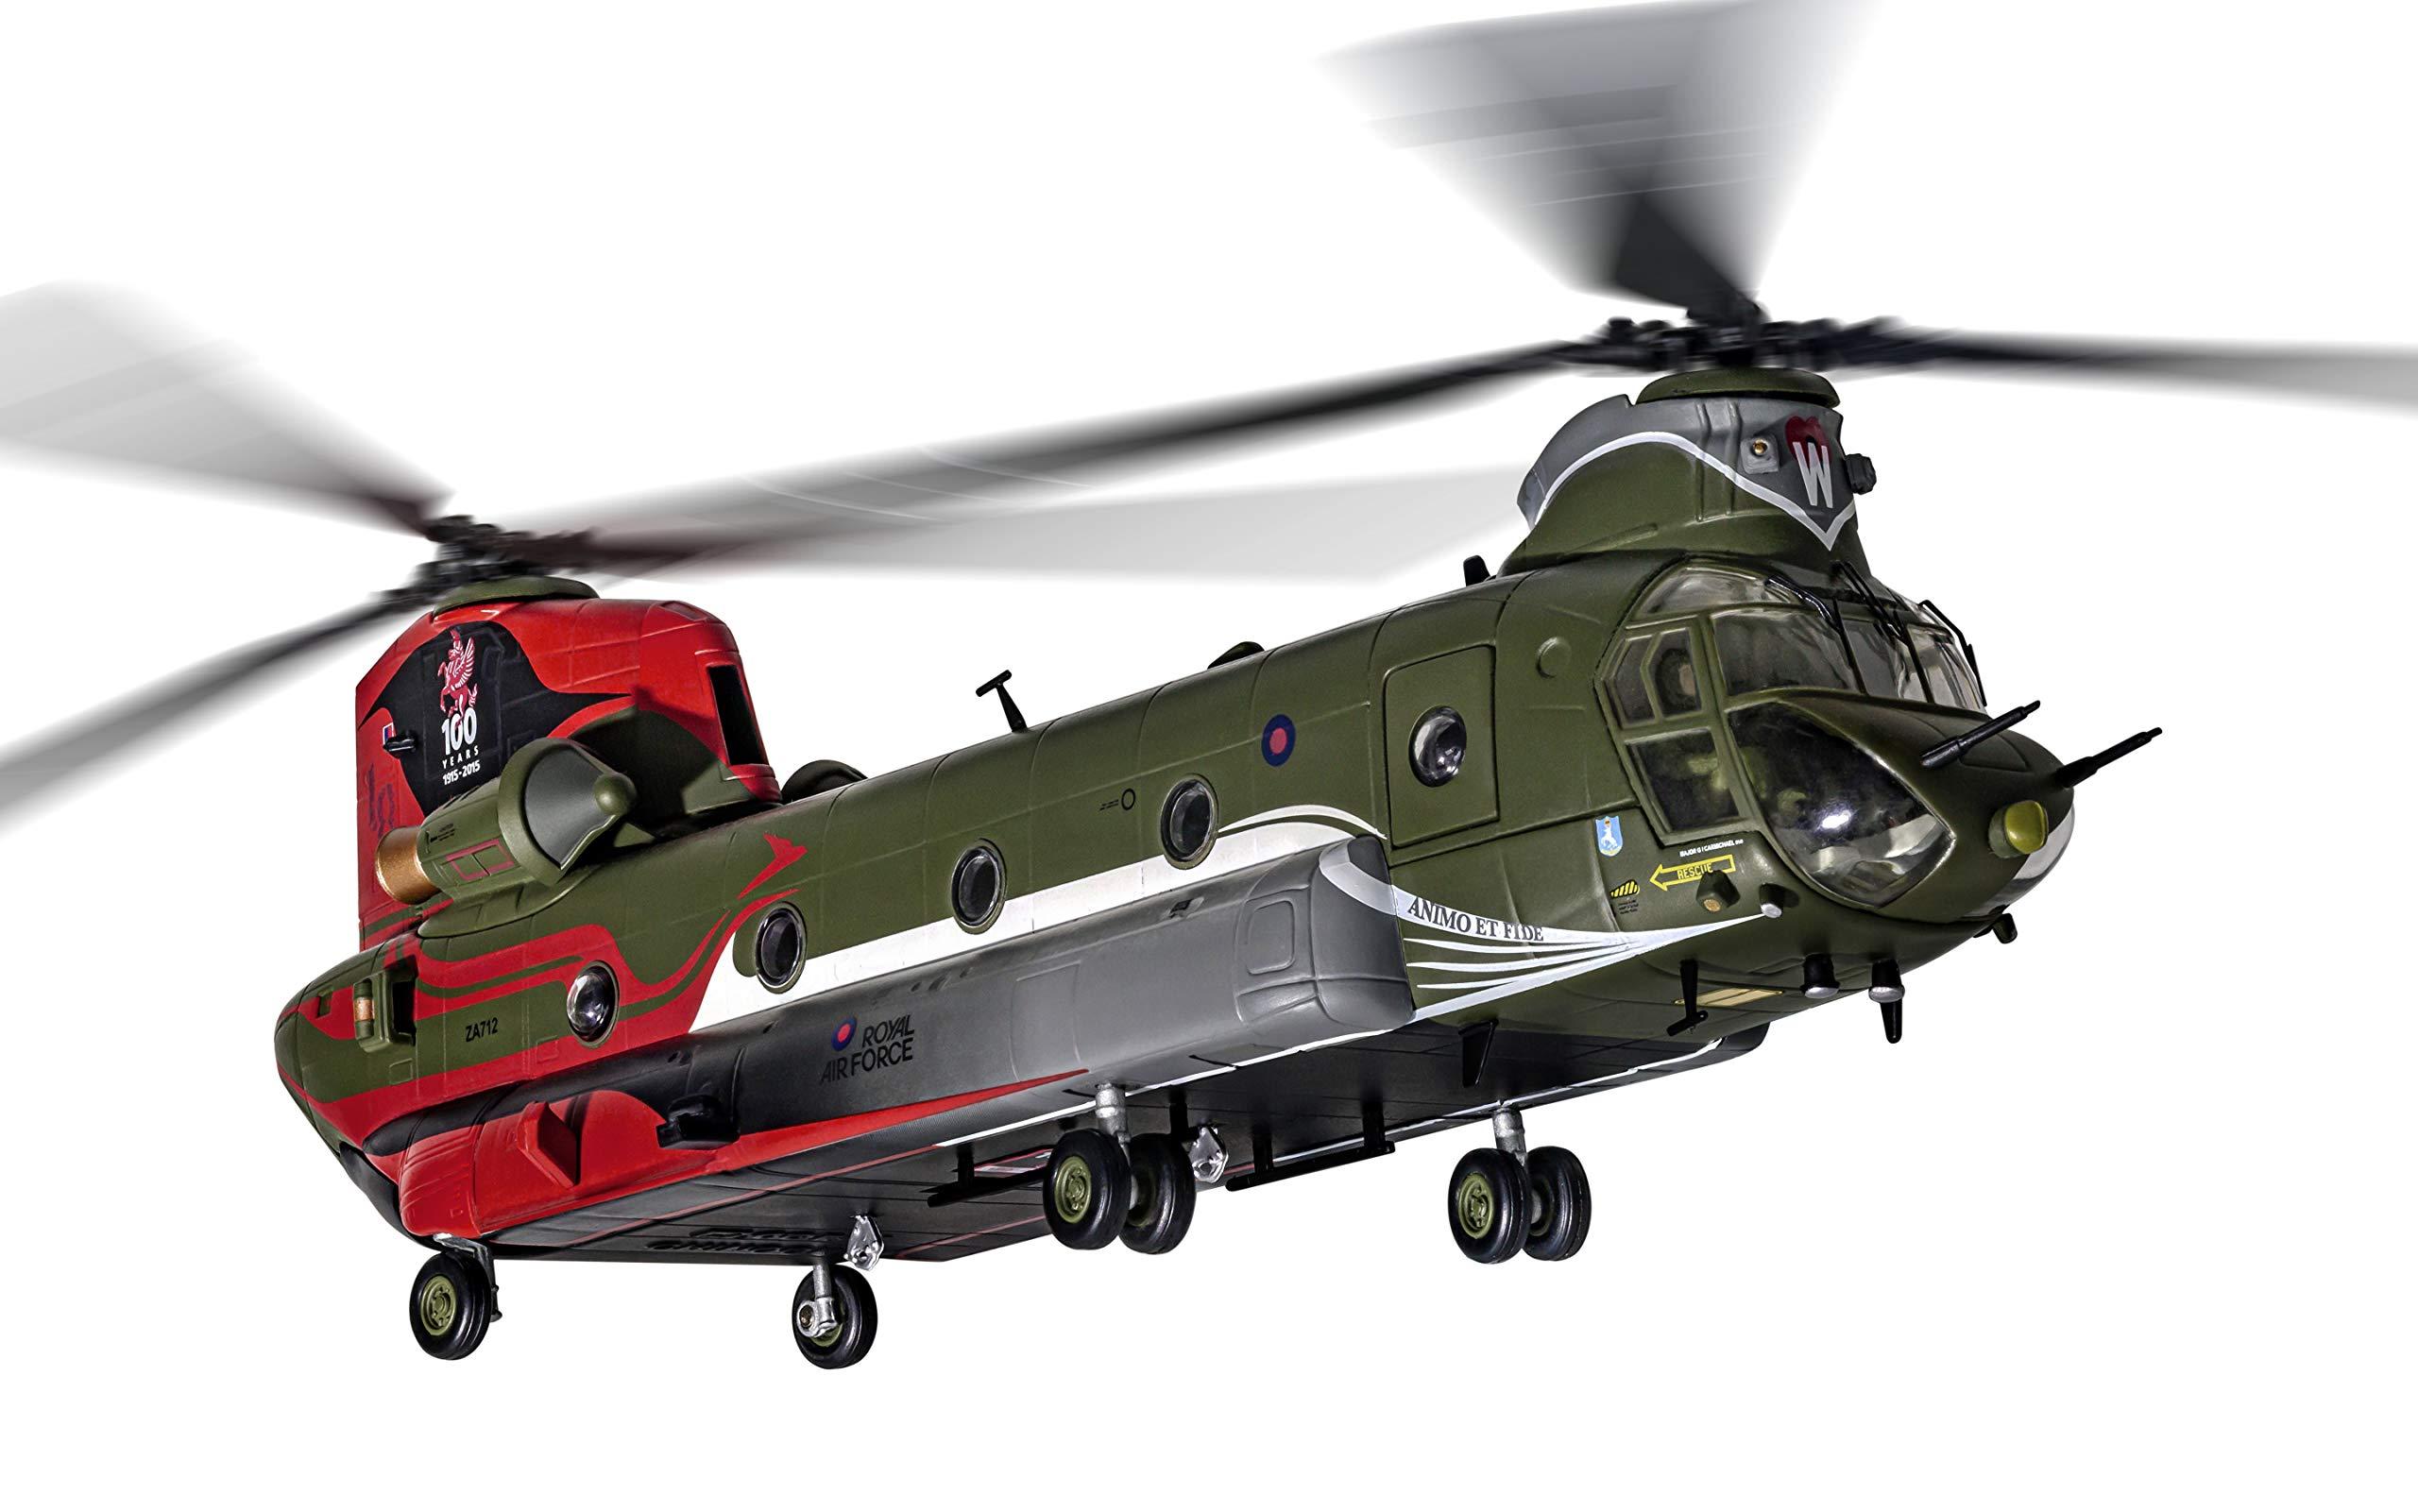 Rc Chinook Helicopter: RC Chinook Helicopter Types: Which One Is Right for You?